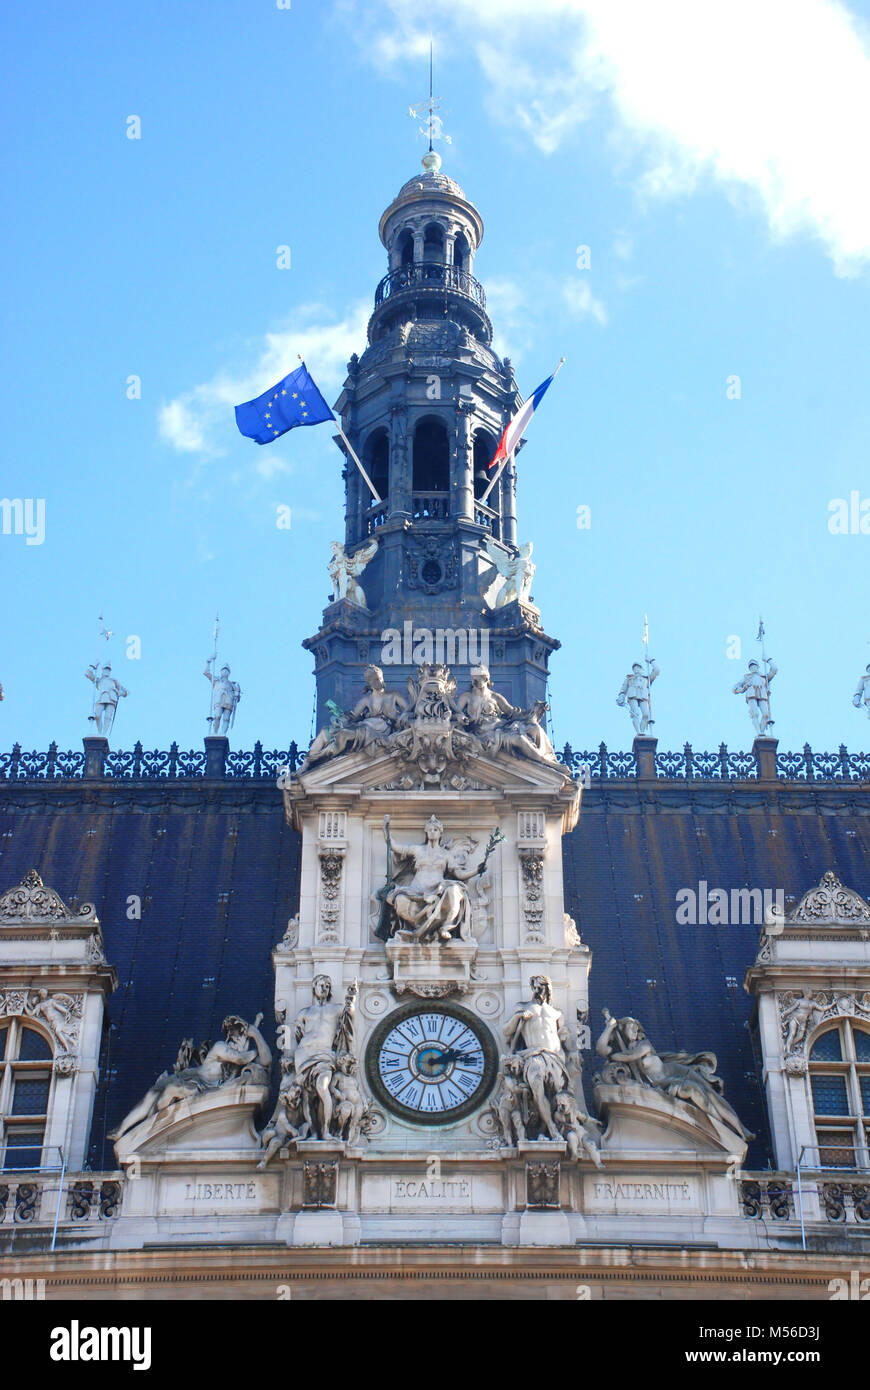 Detail from the roof of Hotel de Ville Paris France Stock Photo